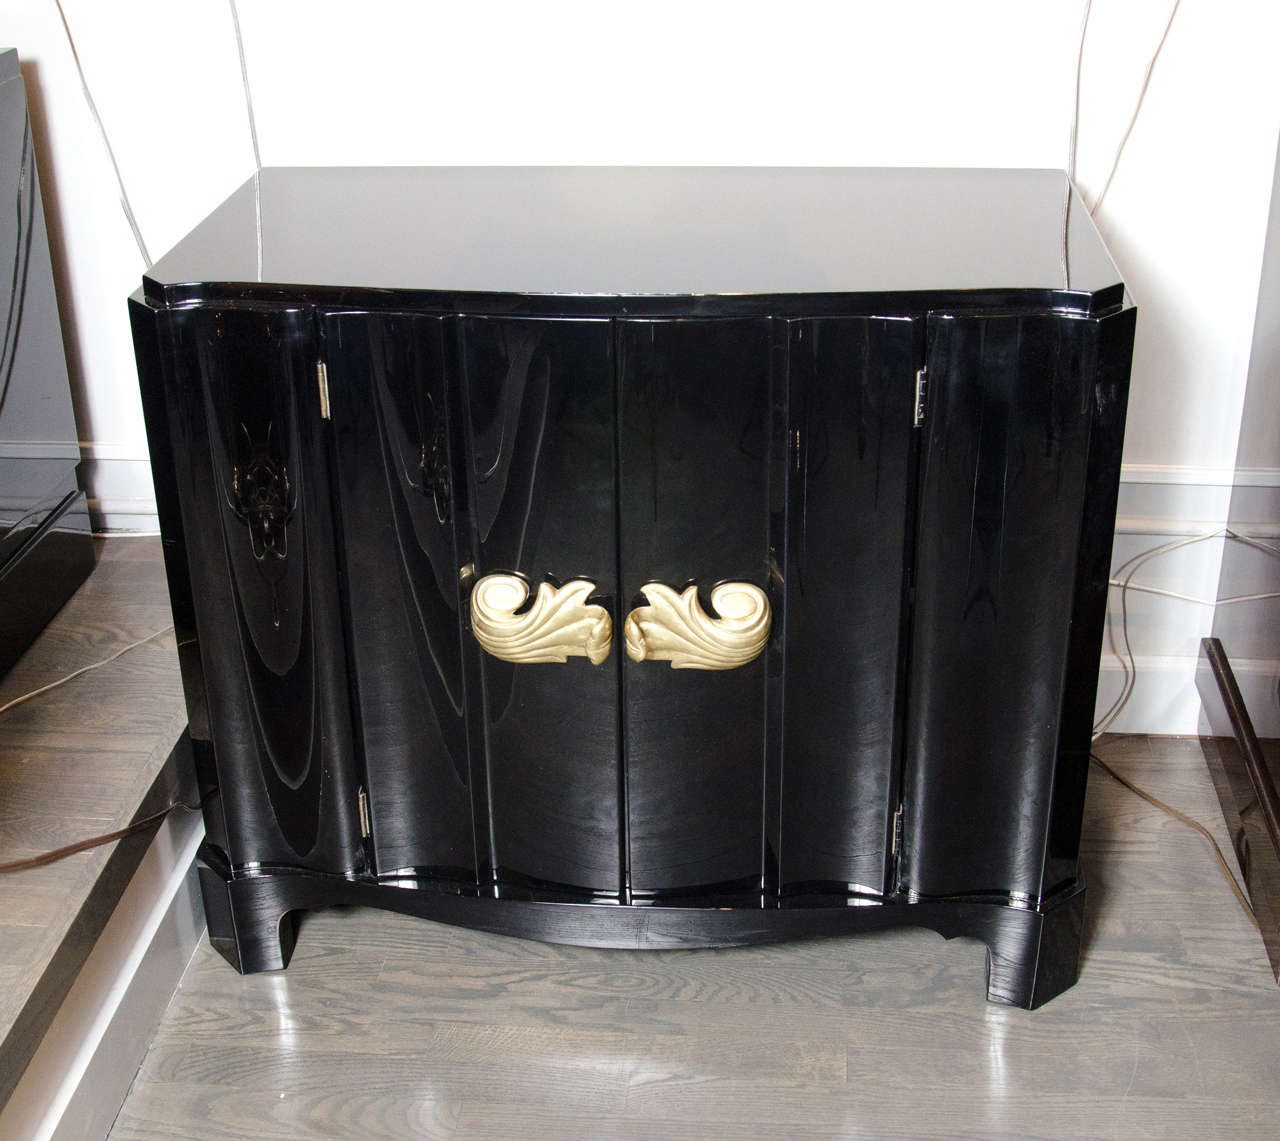 This exceptional 1940s Hollywood serpentine cabinet by Dorothy Draper consists of ebonized mahogany with acanthus style brass pulls on paneled doors. It's depth provides ample storage and is raised slightly off the floor. This stunning piece is a